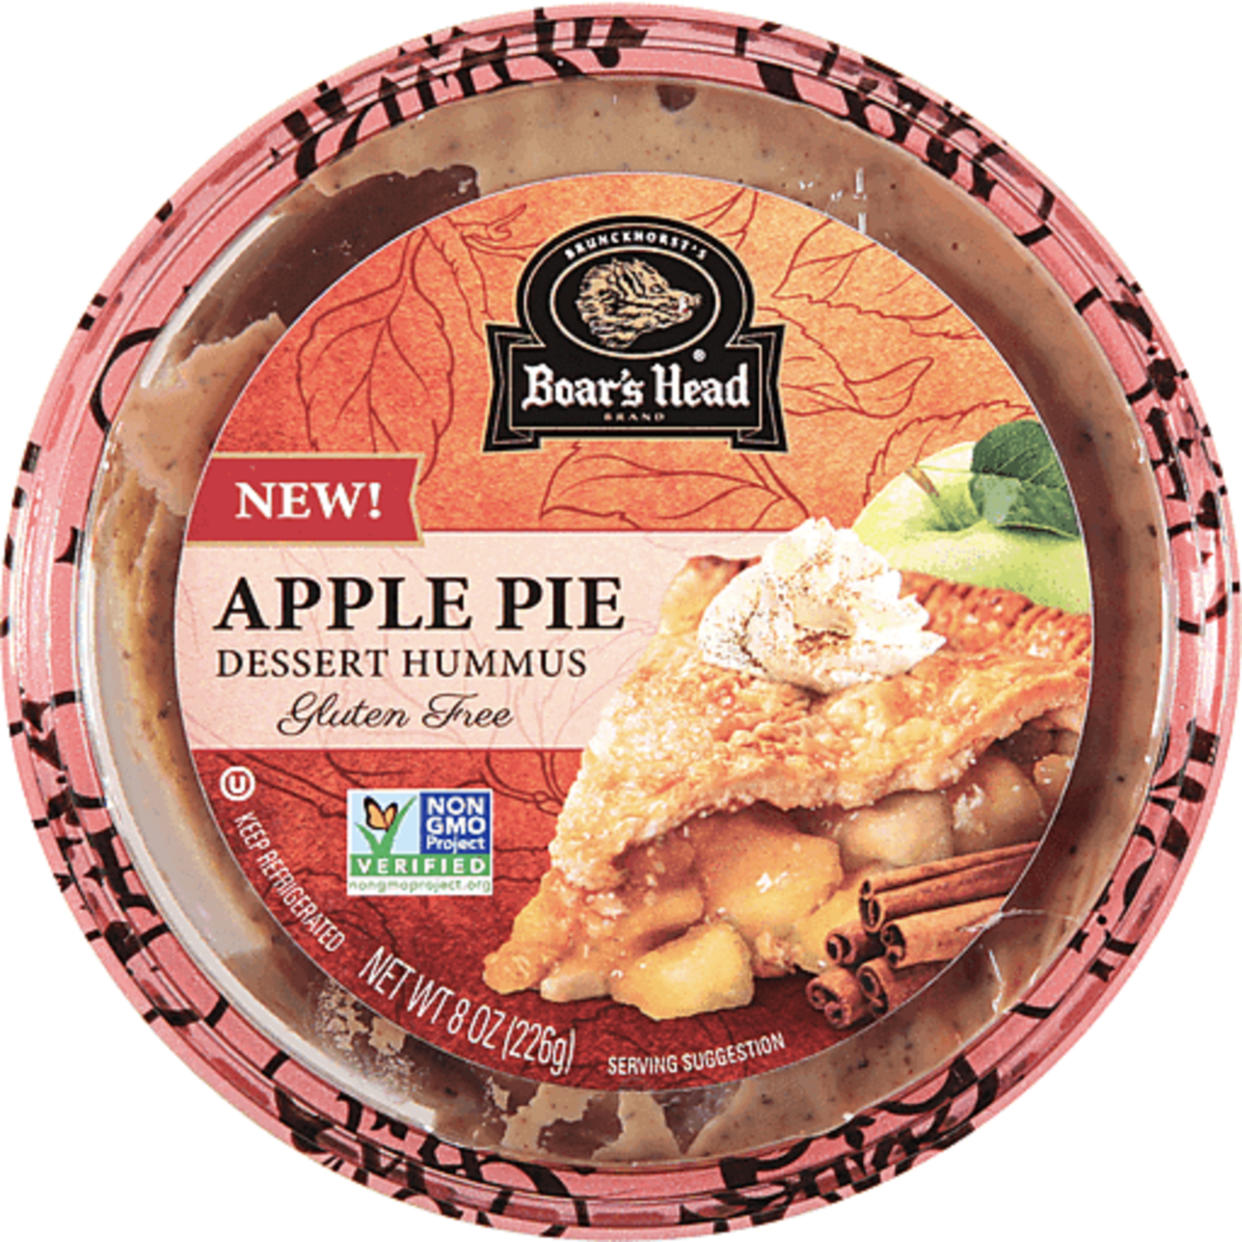 Boar’s Head Apple Pie Dessert Hummus boldly goes where chickpeas have never gone before. (Boar's Head)